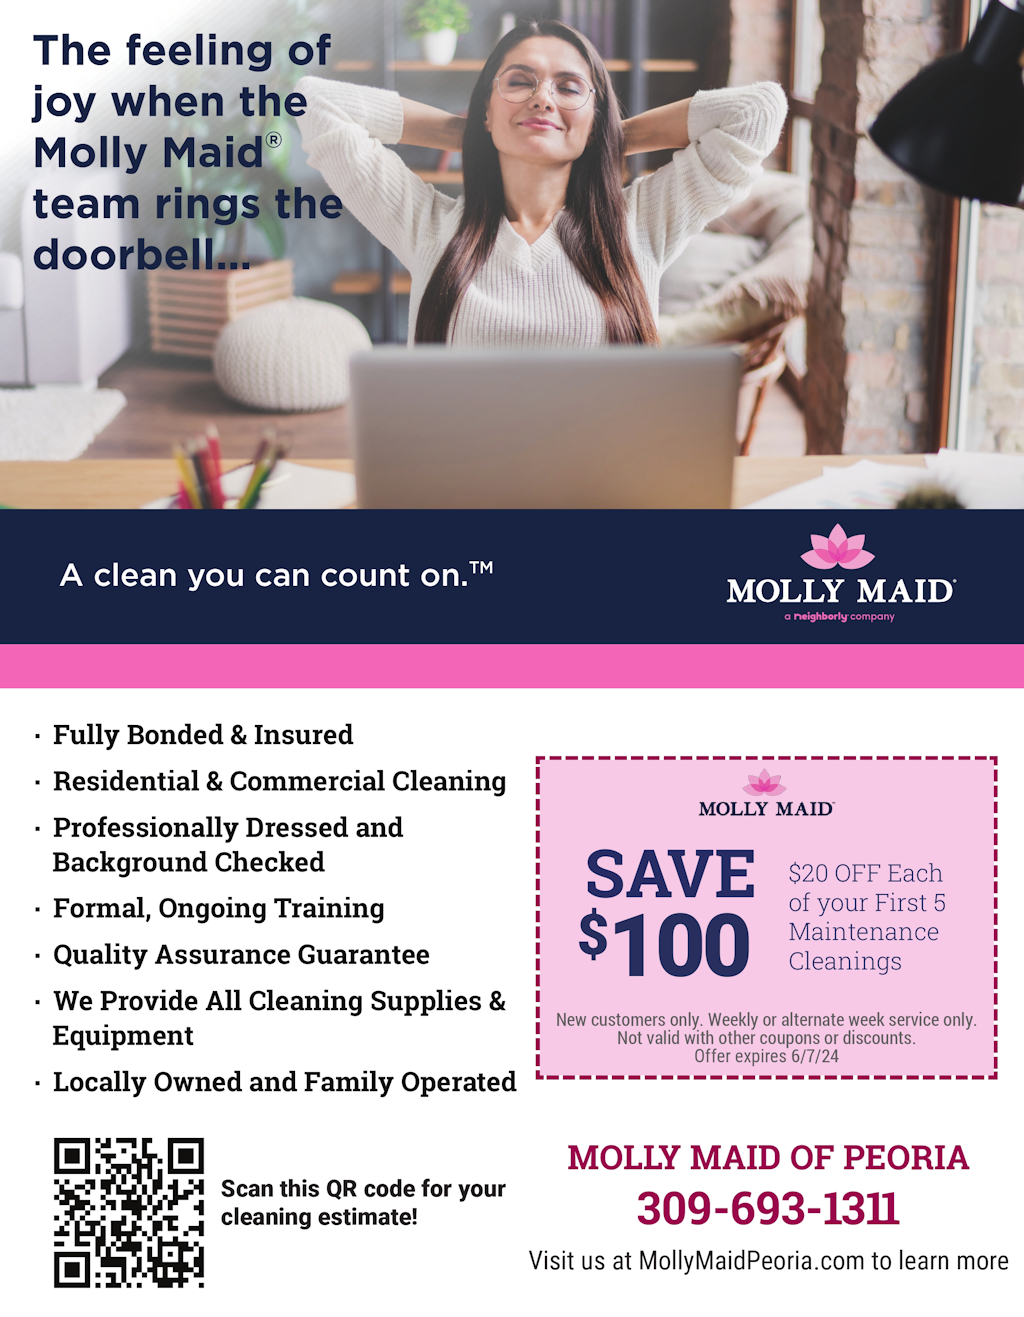 Molly Maid of Peoria home house cleaning services coupons with one time or continual service coupons located in Peoria and service the tri-county area in Illinois